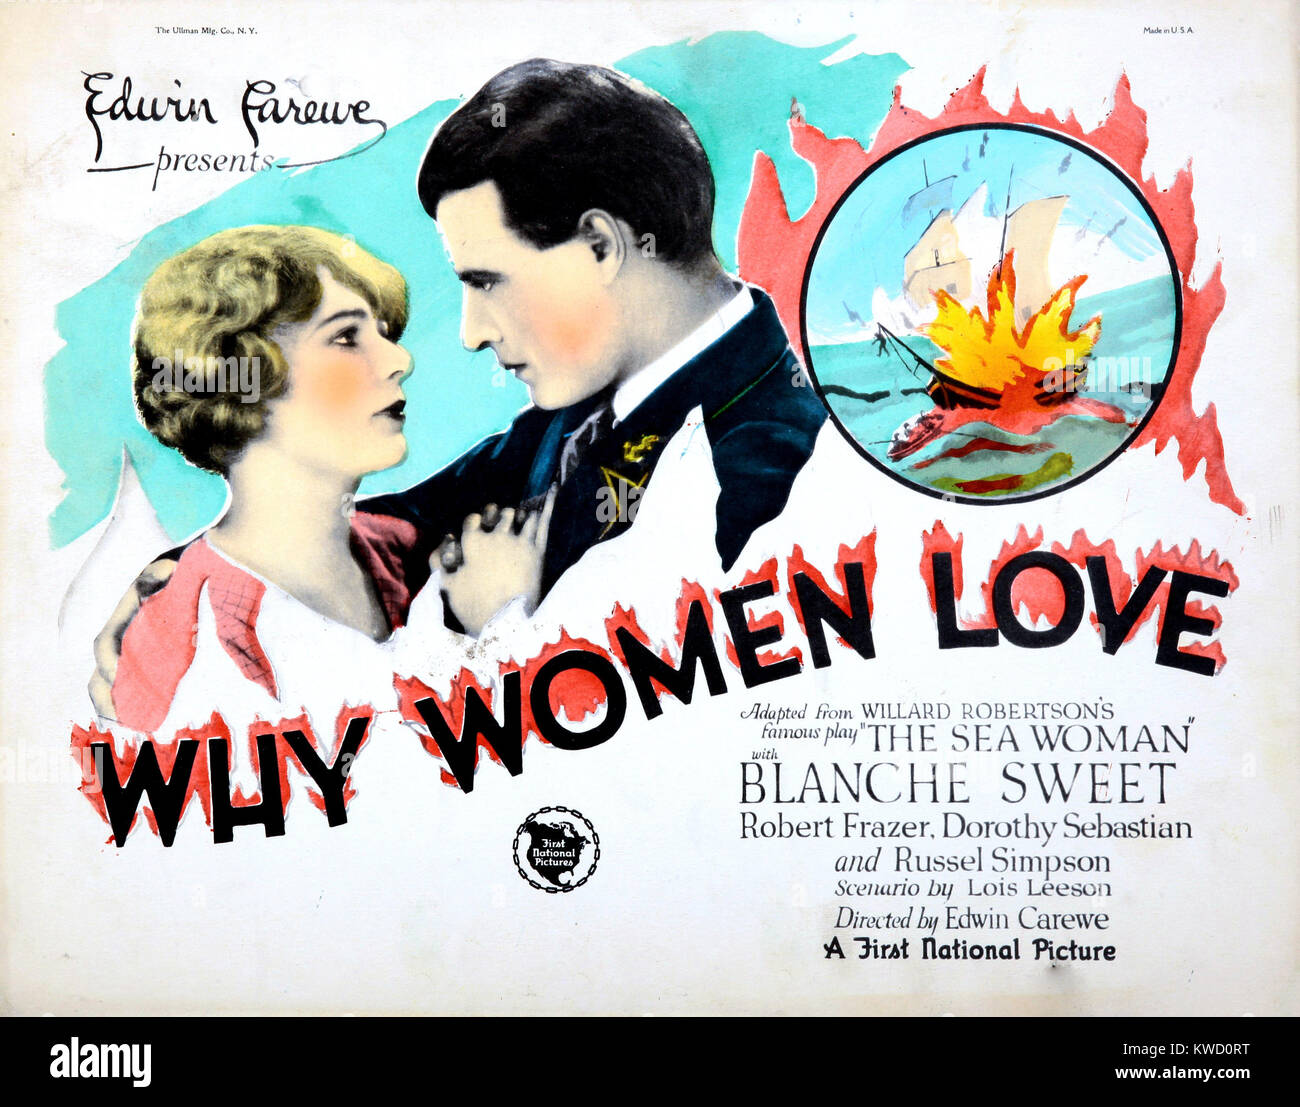 WHY WOMEN LOVE, US poster, from left: Blanche Sweet, Robert Frazer, 1925 Stock Photo